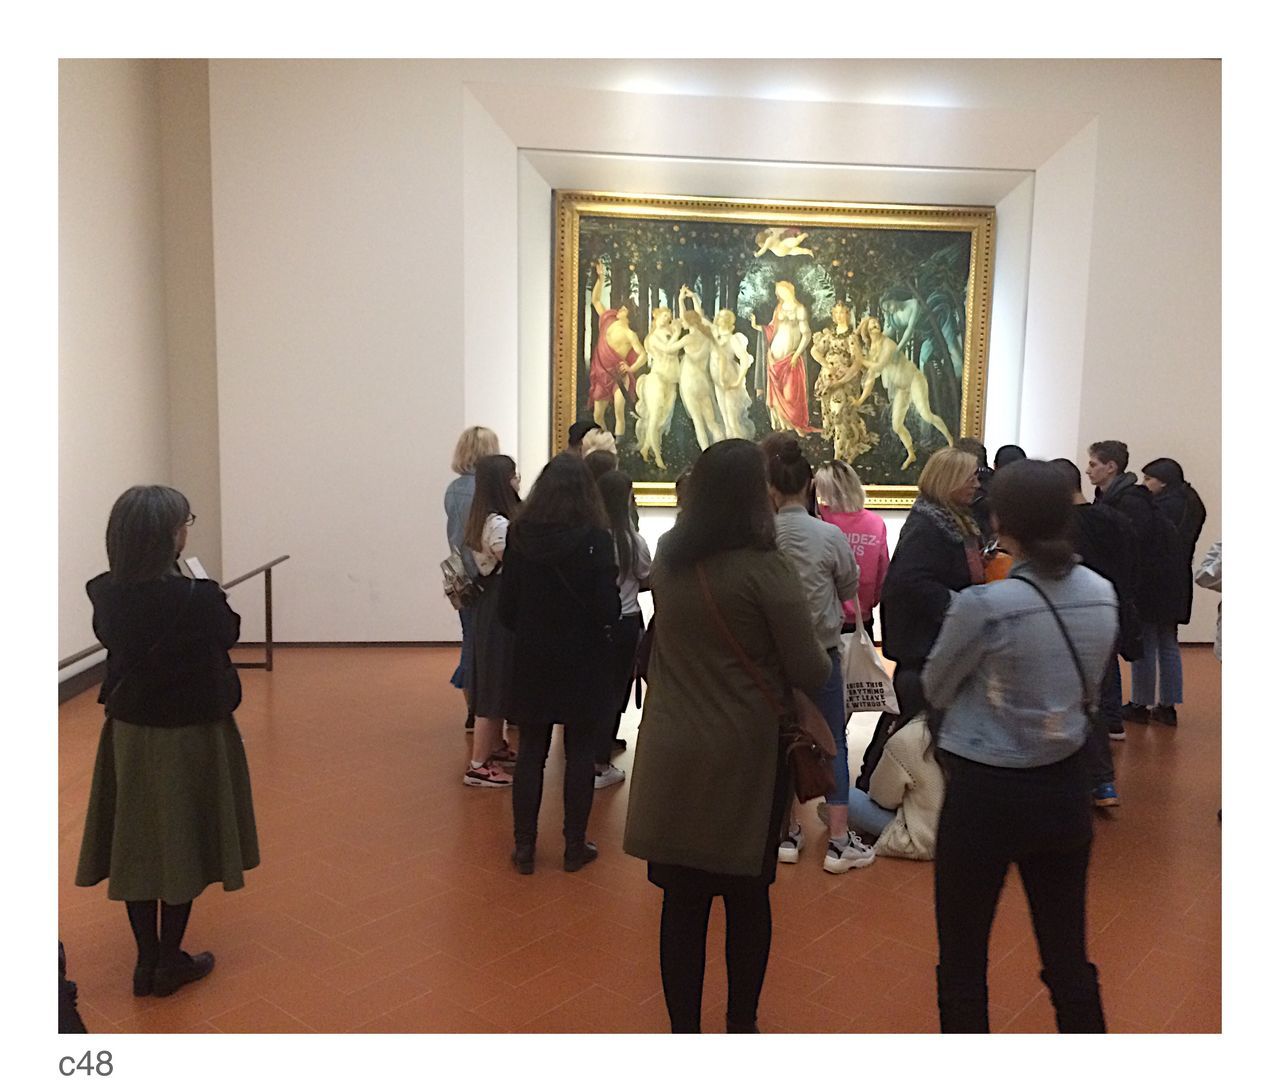 women, group of people, crowd, large group of people, indoors, real people, rear view, adult, museum, standing, architecture, men, leisure activity, arts culture and entertainment, art museum, exhibition, lifestyles, full length, art and craft